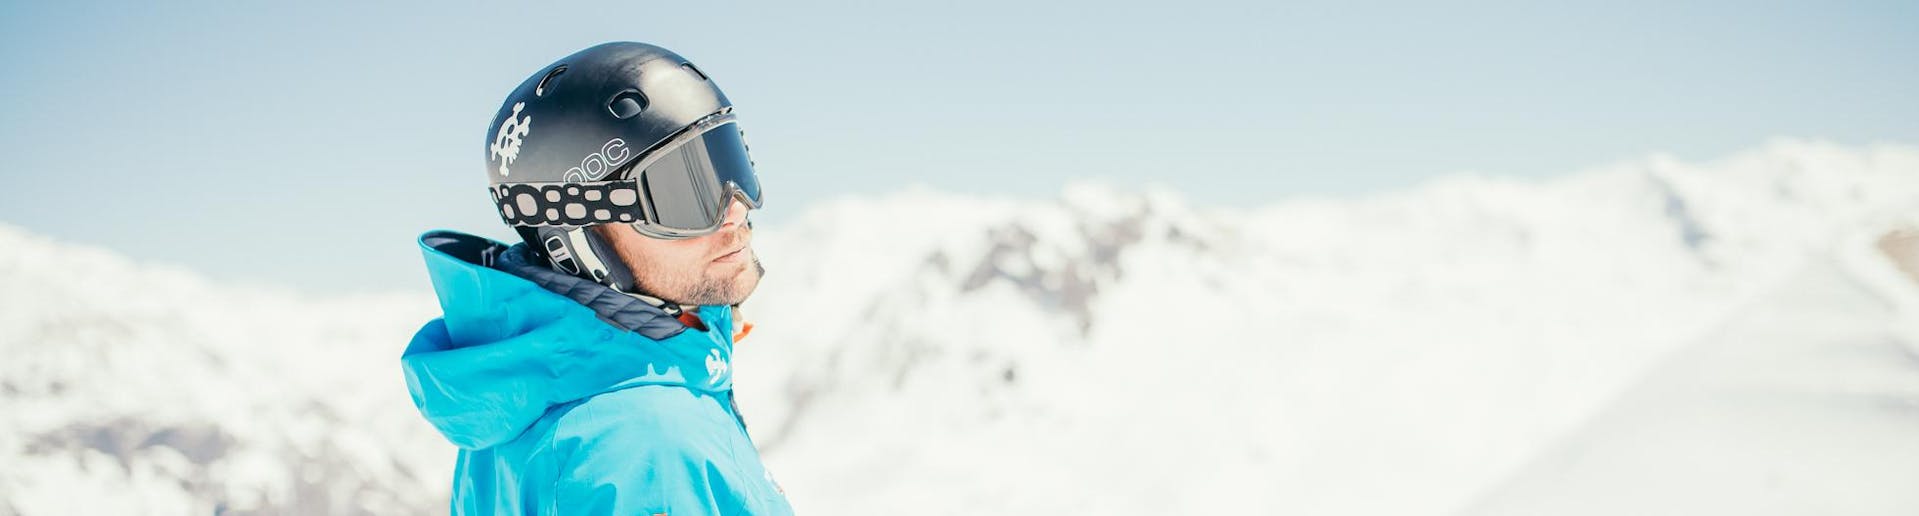 Adults are taking Private Ski Lessons for Adults - Low Season with our ski school Starski Grand Bornand.